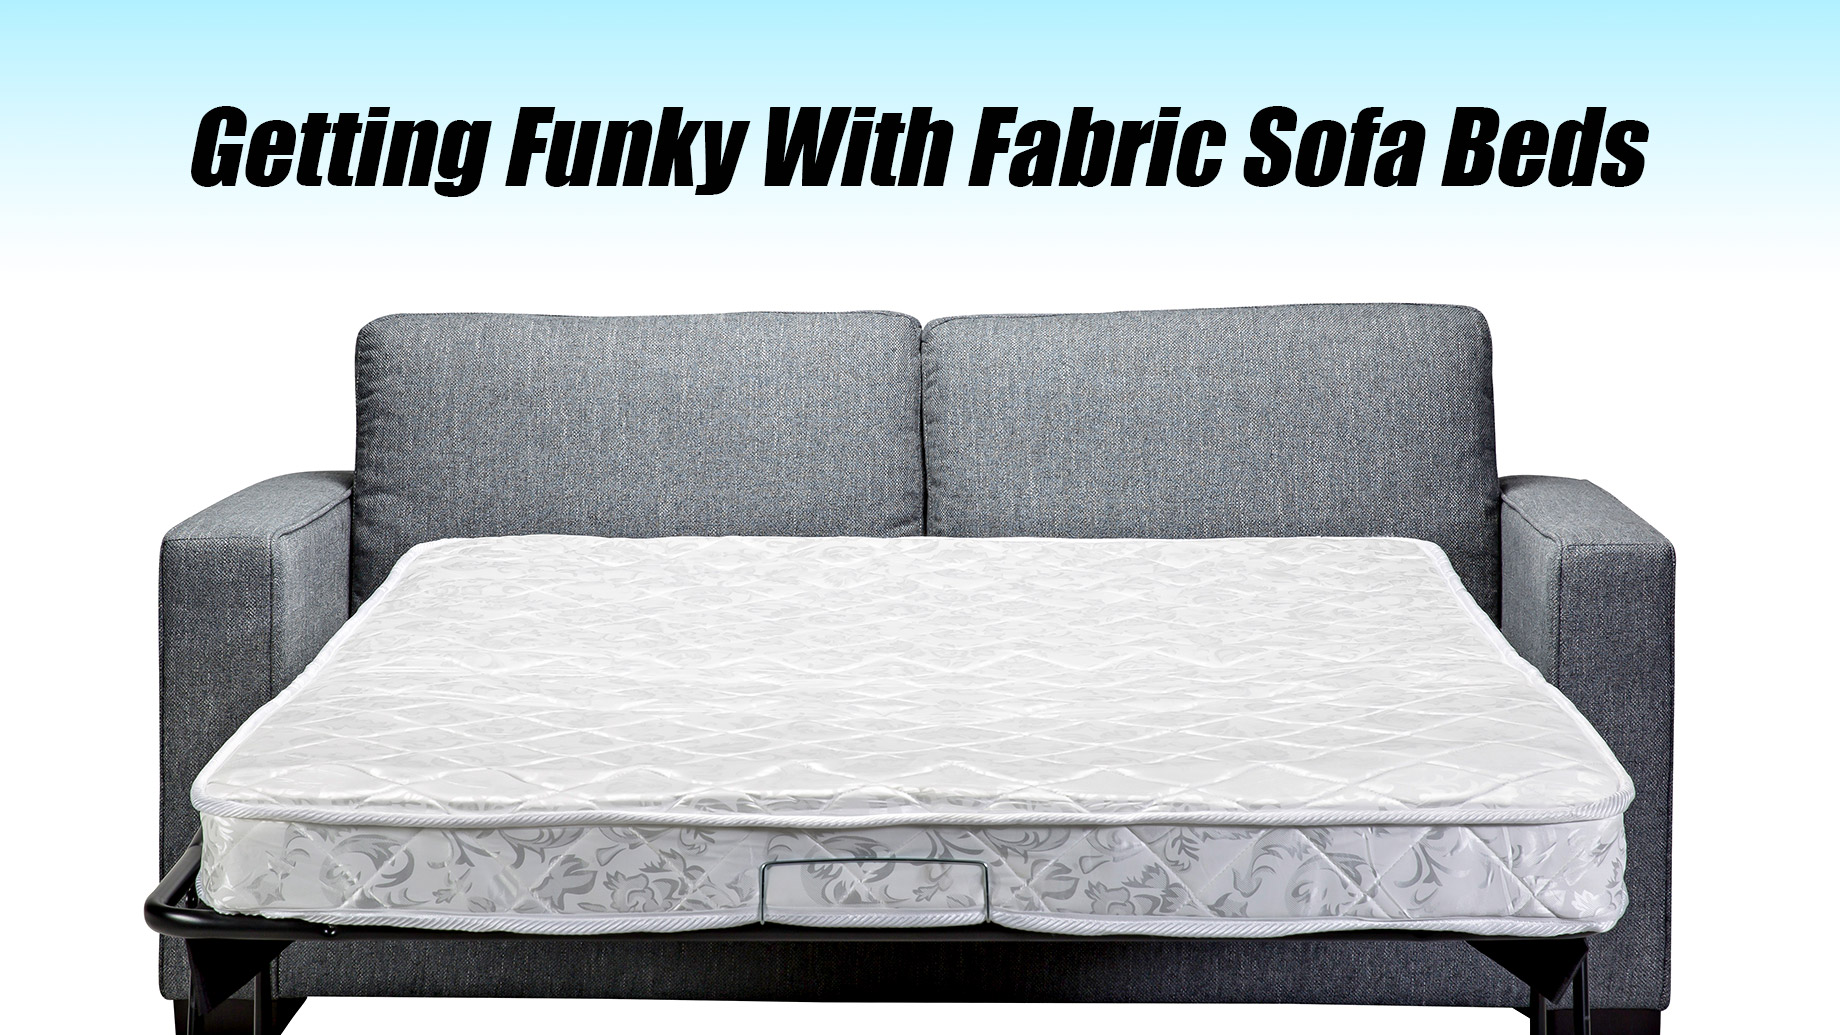 Home Talk - Getting Funky With Fabric Sofa Beds